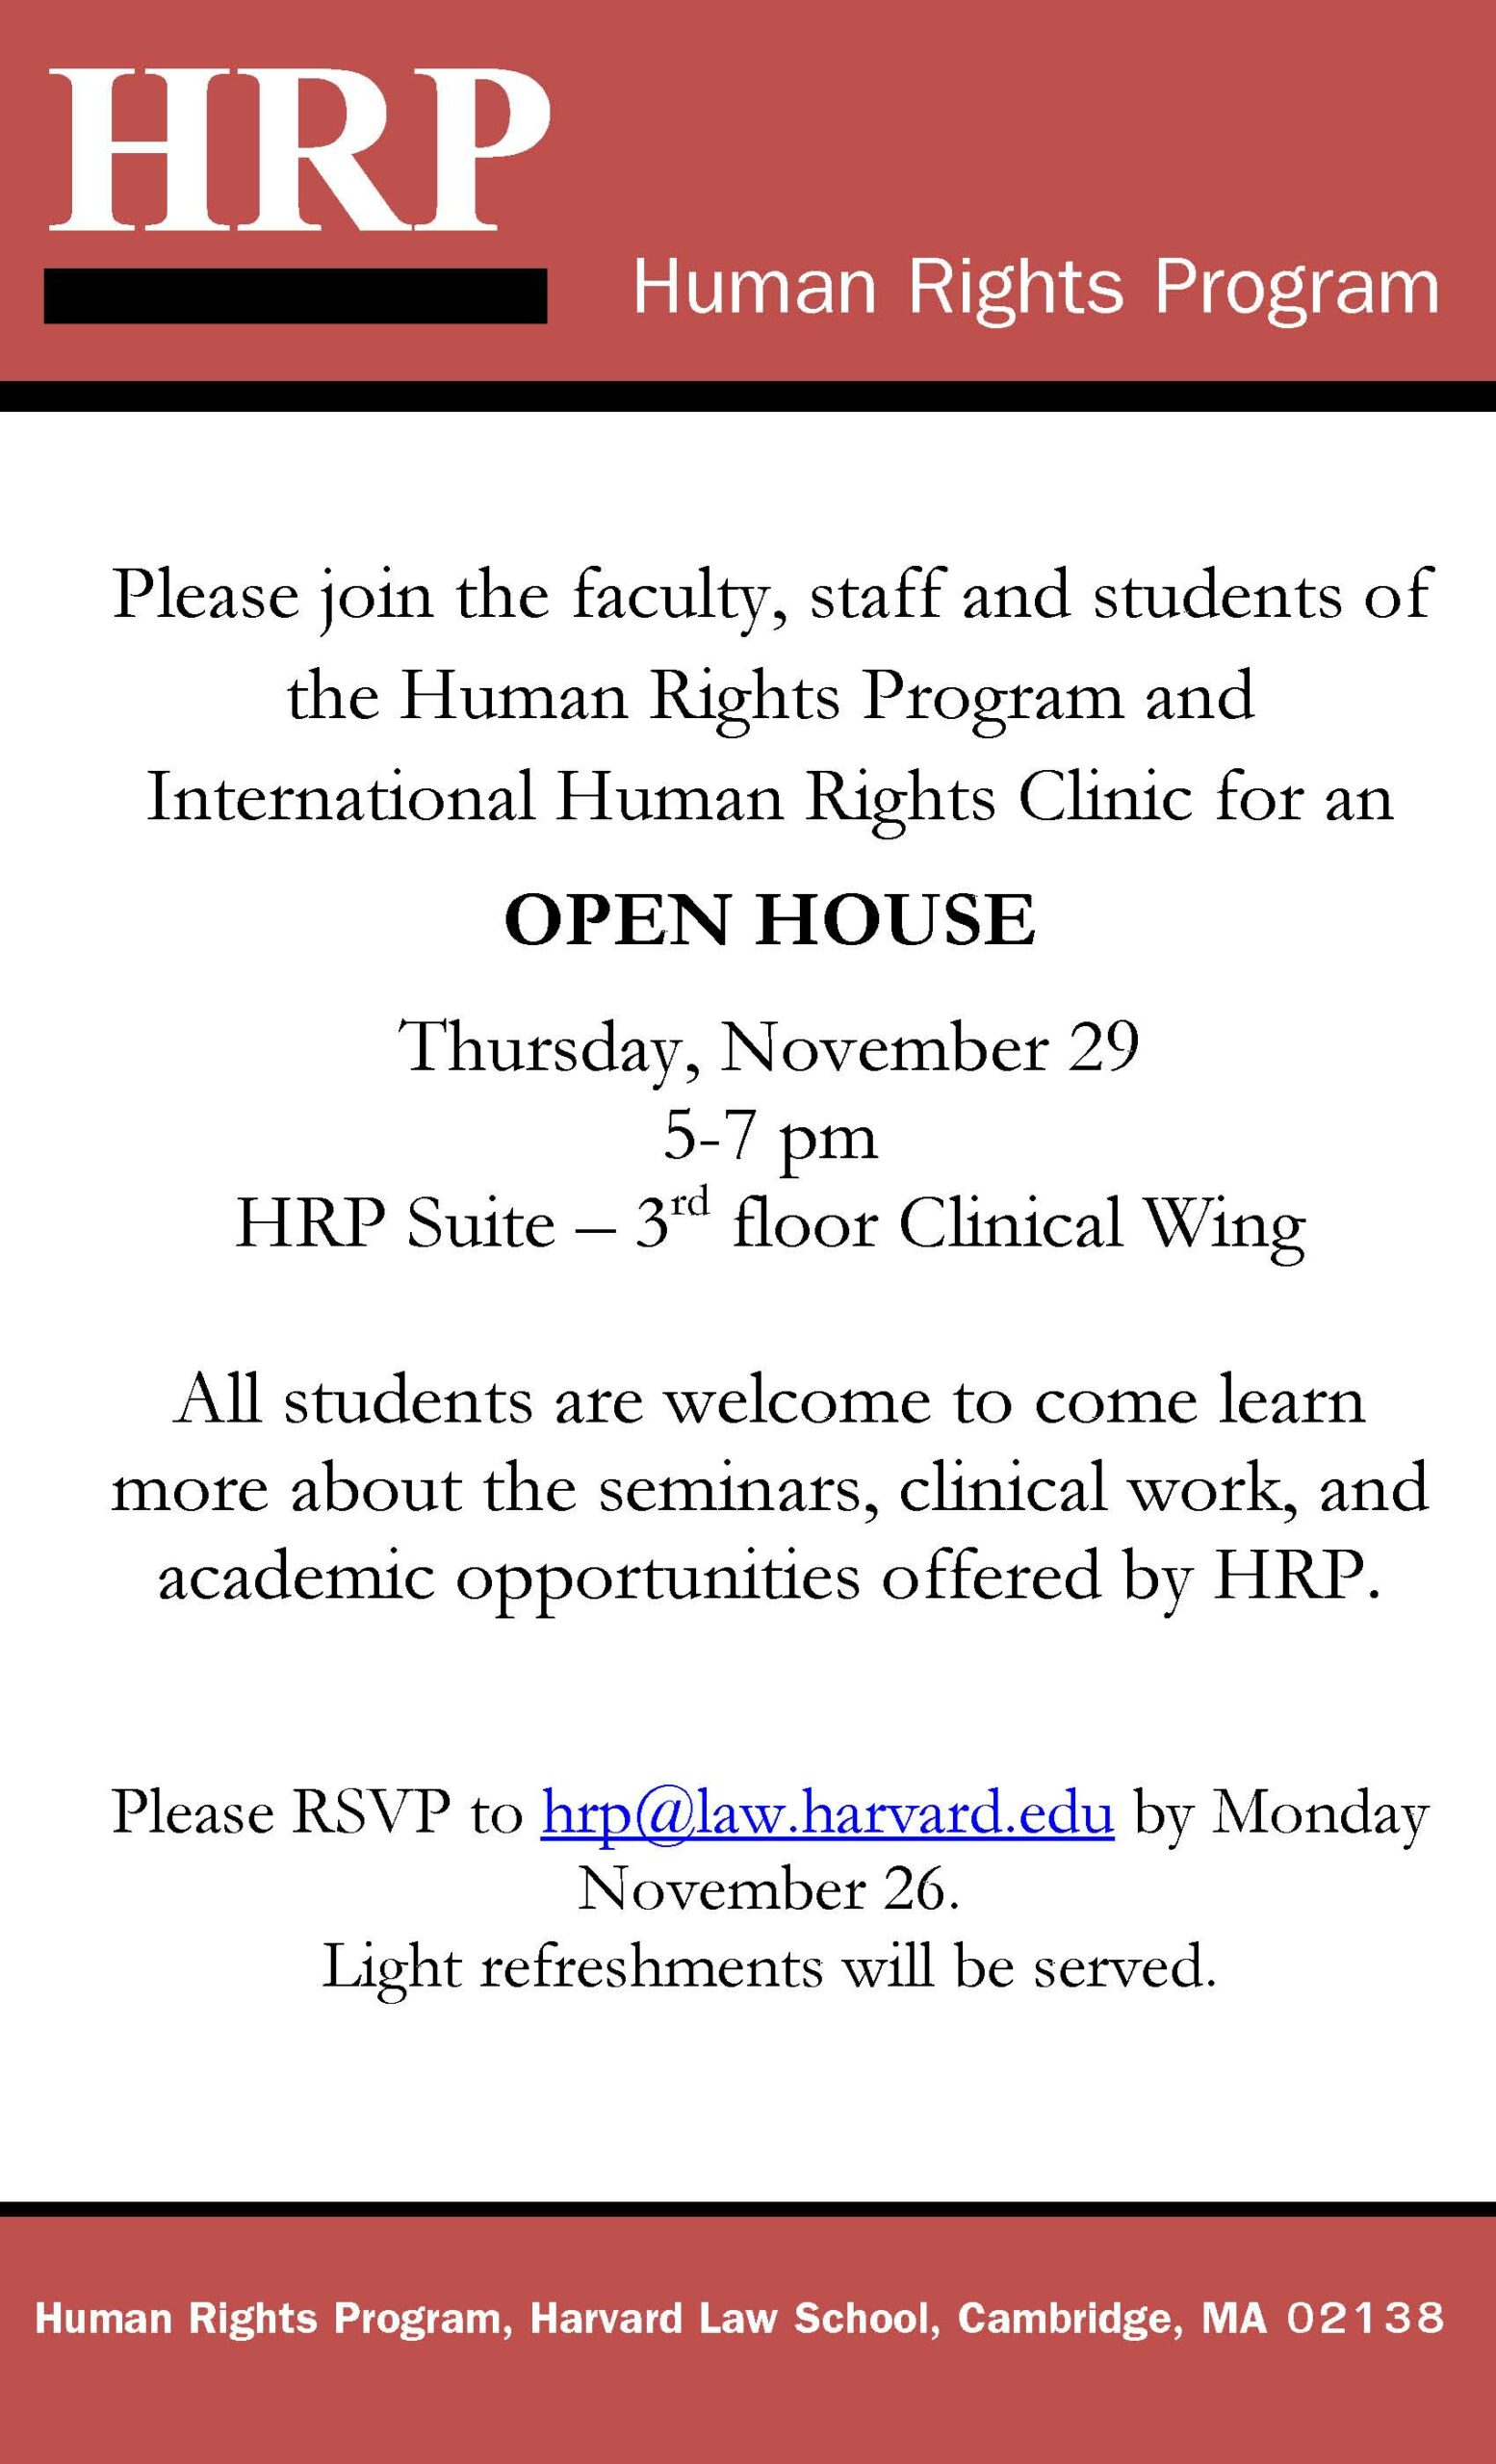 Open House Poster: Human Rights Program banner followed by details for the event.